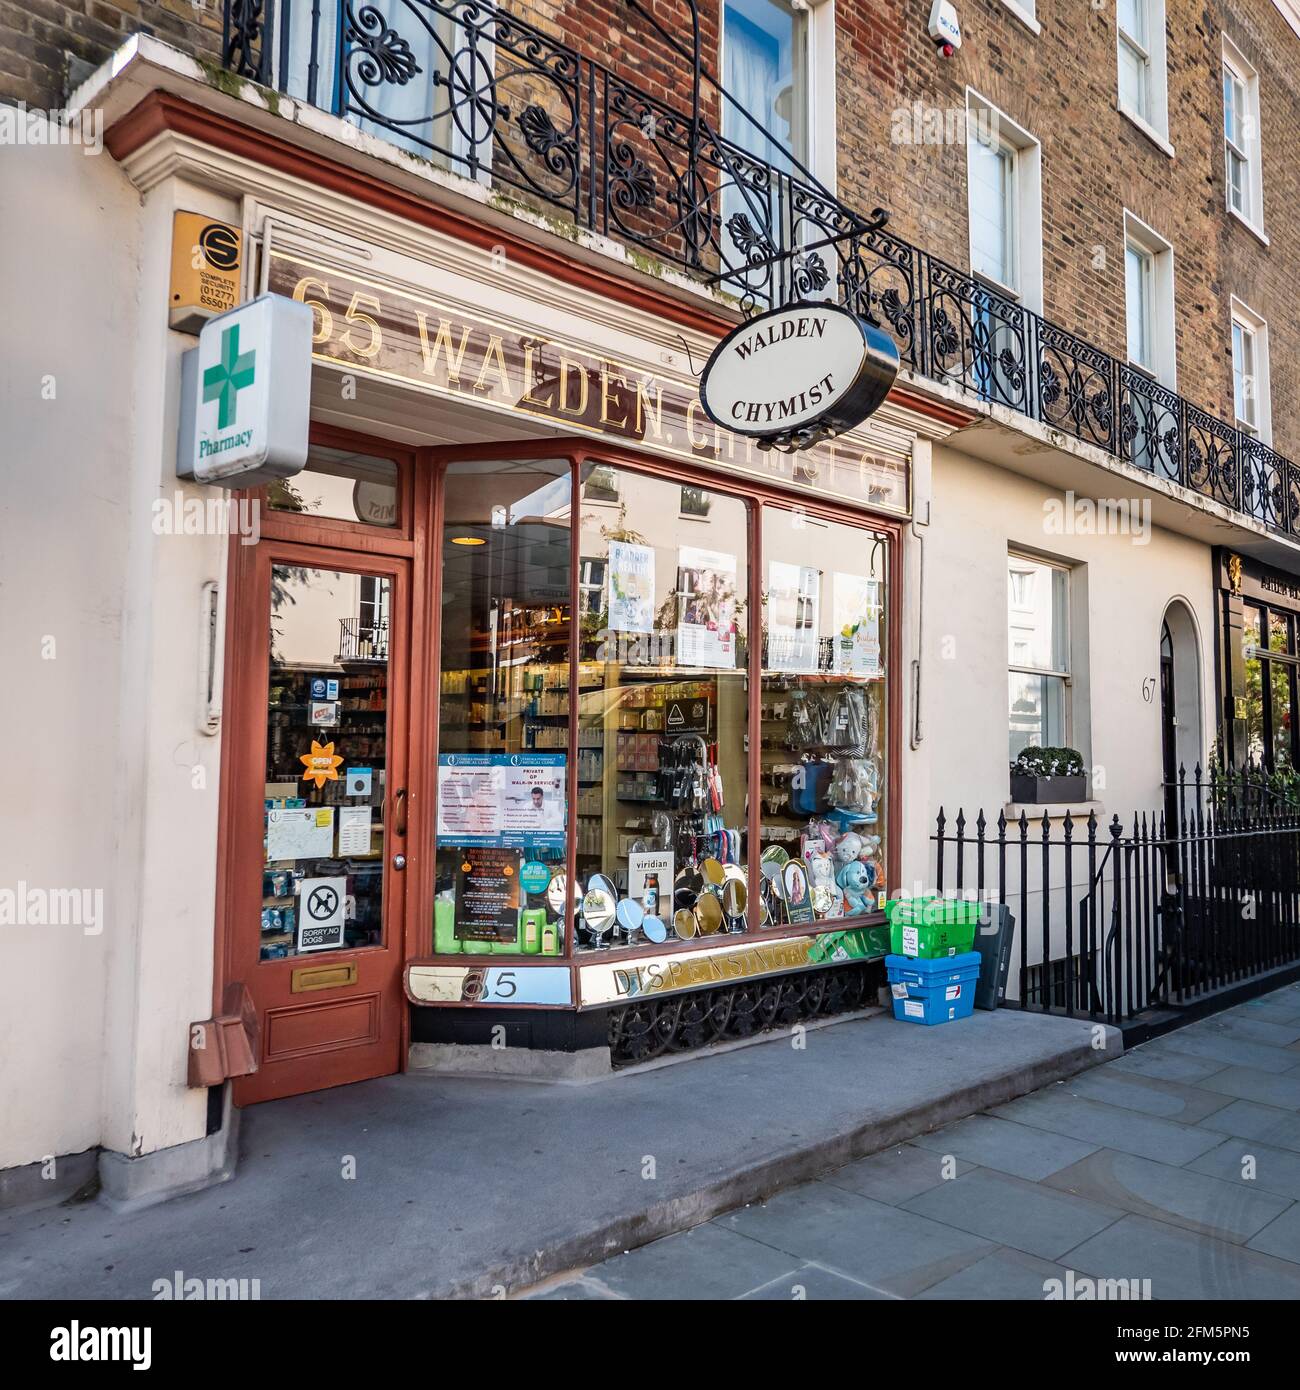 Traditional English Chemist Shop. The display window and façade to a small business London shop on the streets of Kensington and Chelsea. Stock Photo